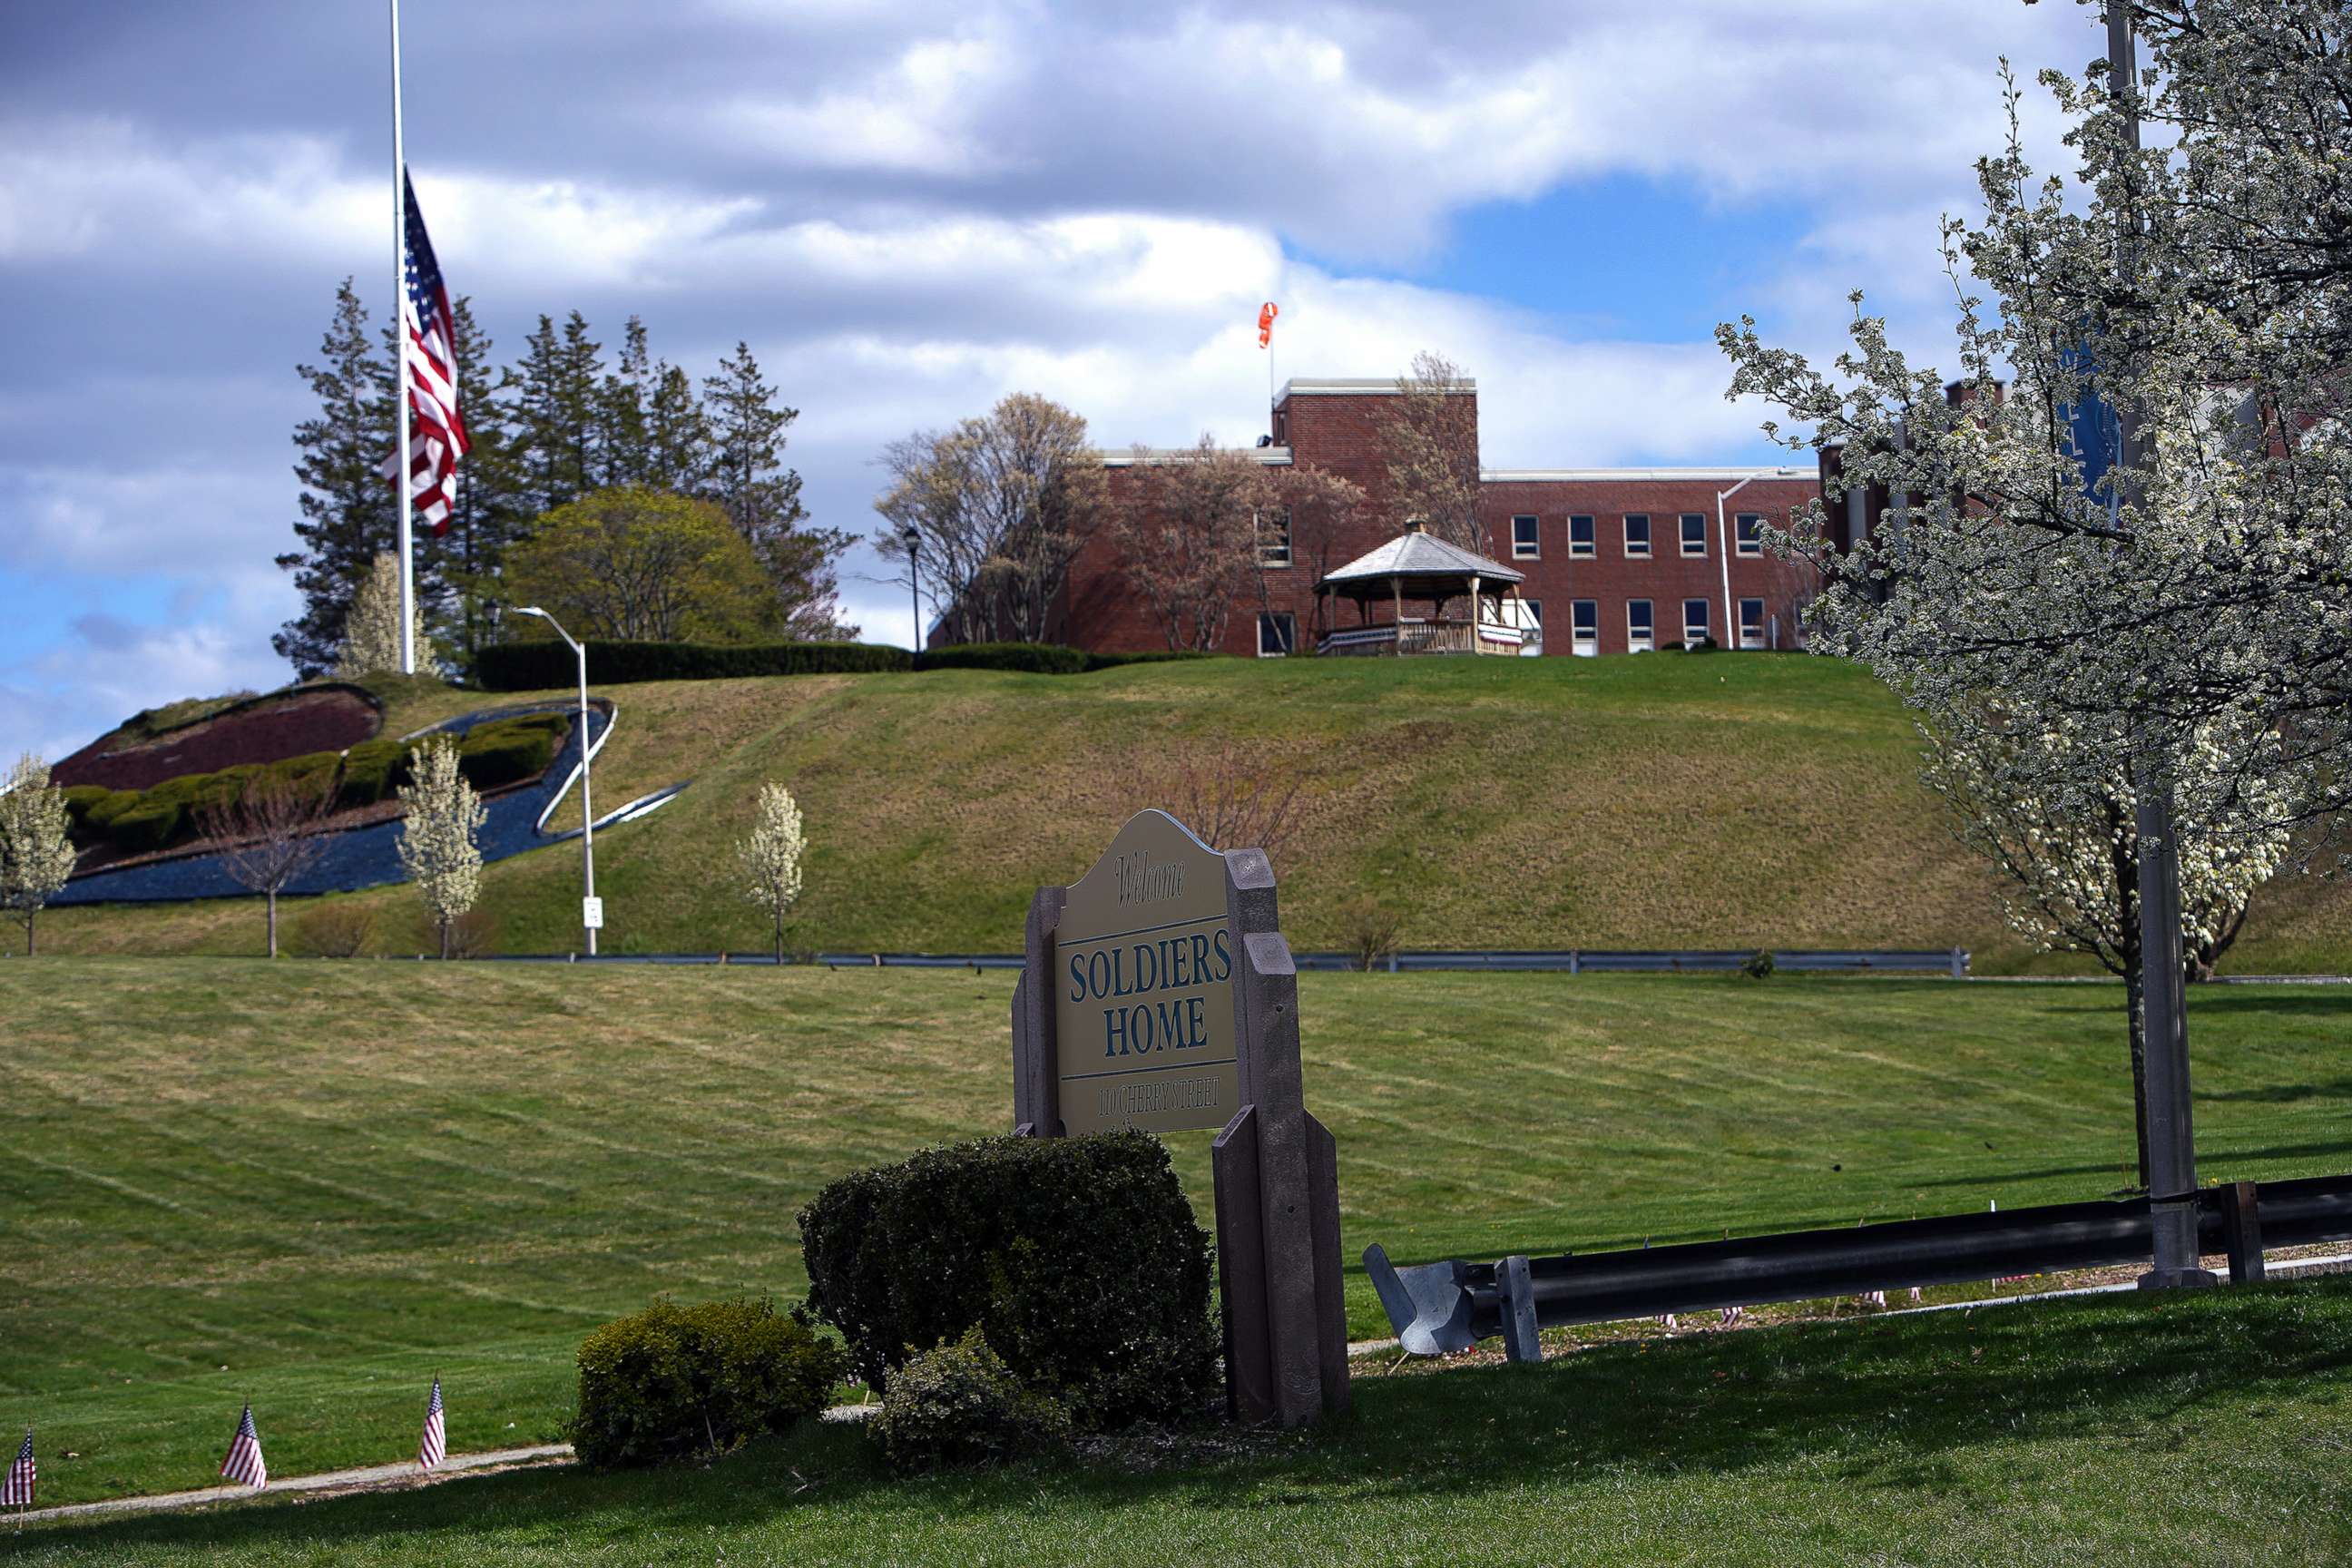 PHOTO: A flag hangs at half mast on the grounds of the Holyoke Soldiers Home in Holyoke, Mass. on April 28, 2020.